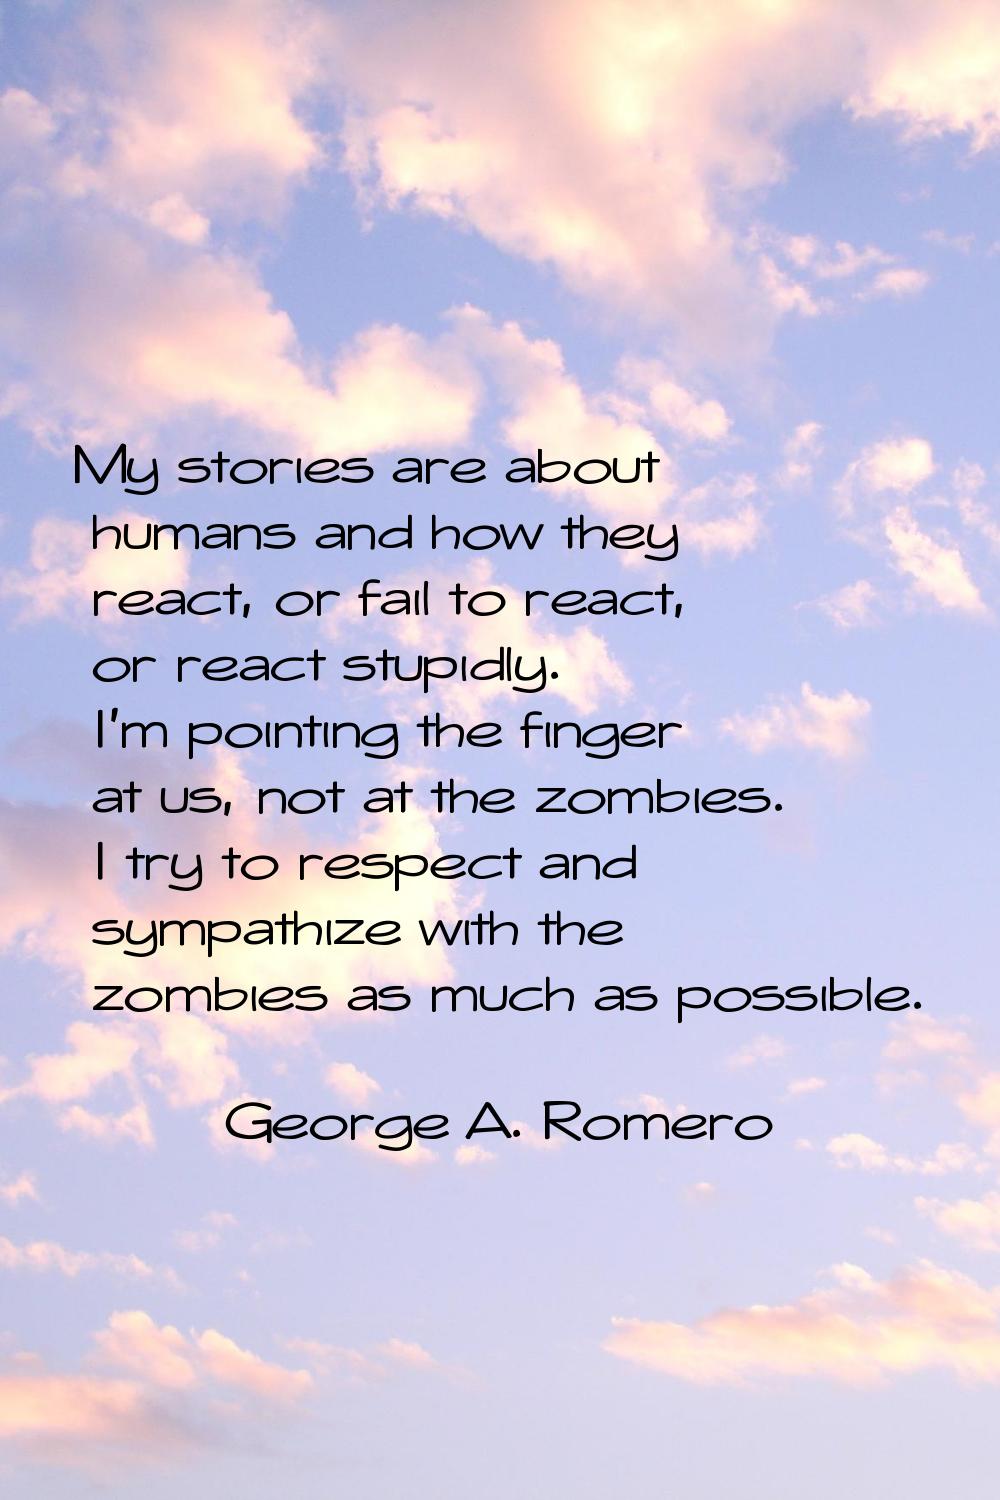 My stories are about humans and how they react, or fail to react, or react stupidly. I'm pointing t